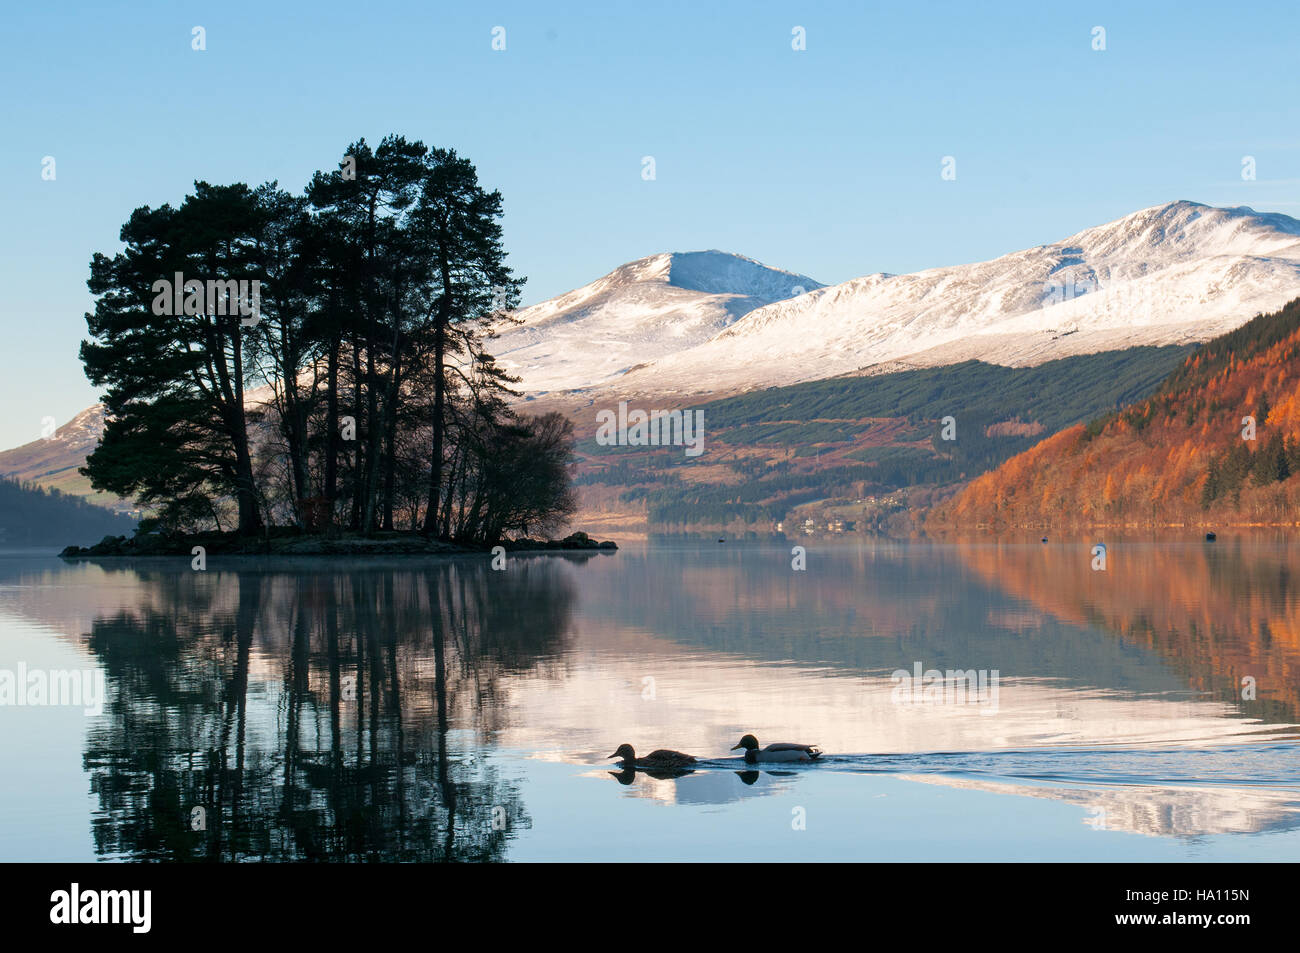 Loch Tay, Kenmore, Perthshire, Scotland, UK with the sun shining on the snowy mountains of the Lawers range in the background Stock Photo